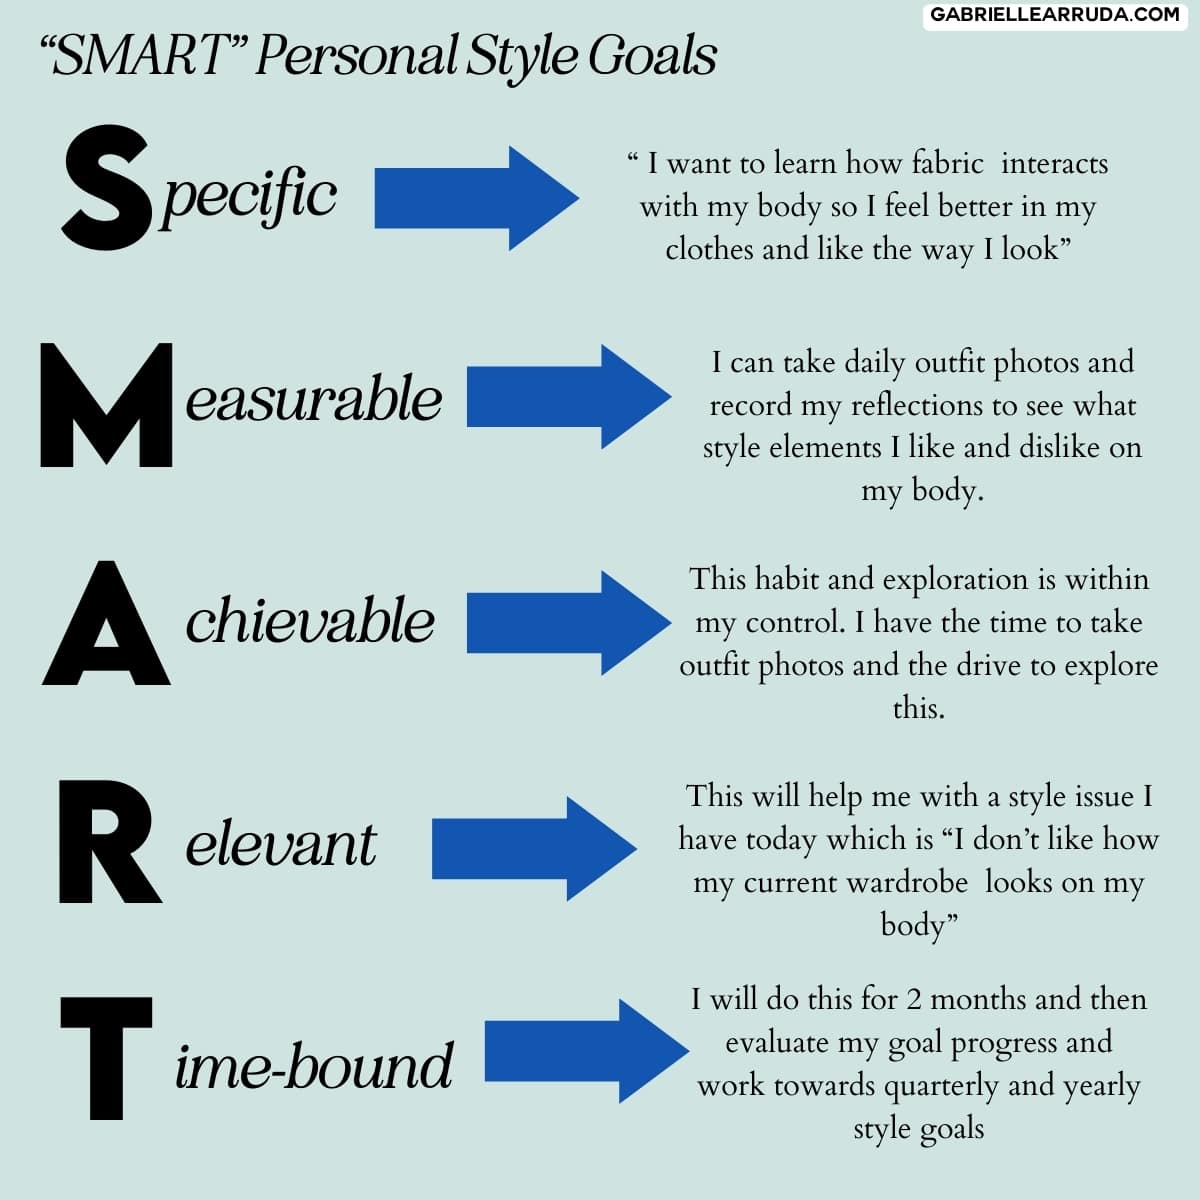 SMART acronym concept for personal style goals